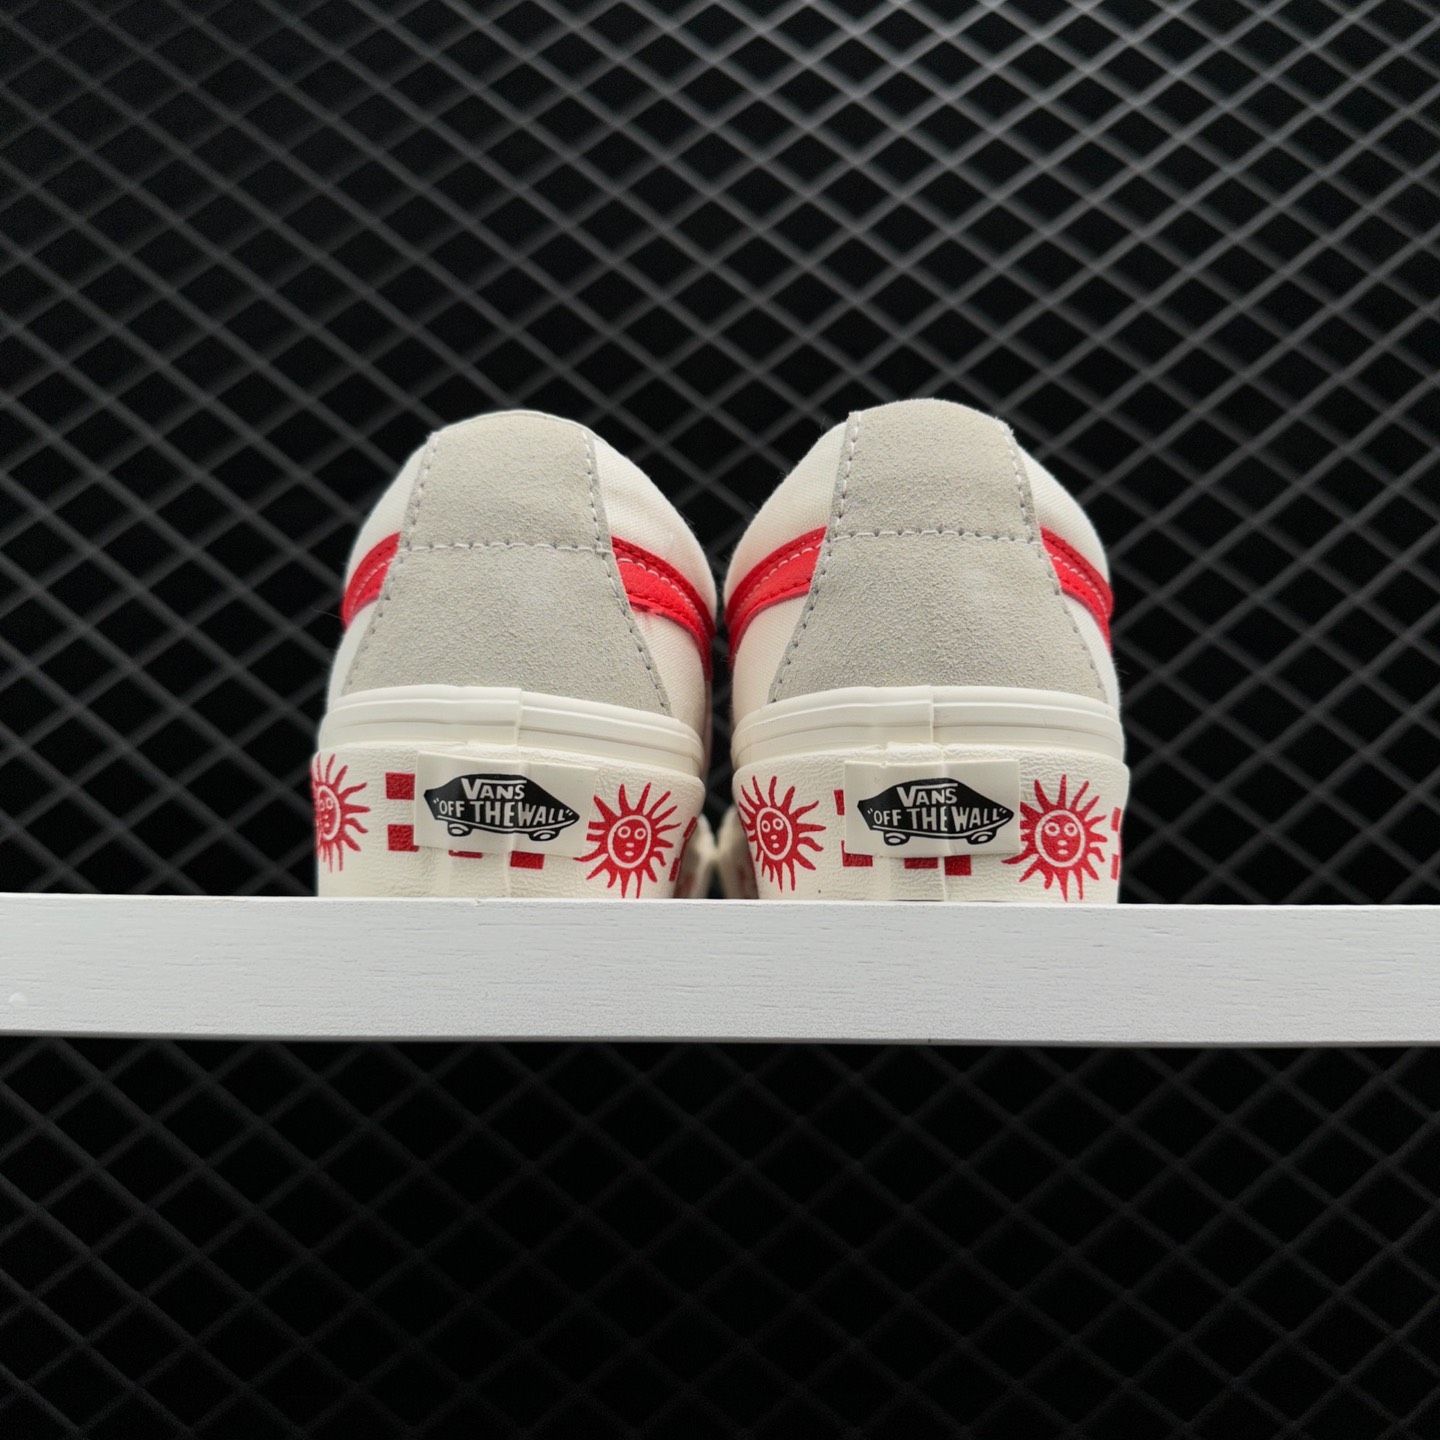 Vans SK8-Low 'White Red' VN0A4UWIB80 - Classic Style Sneakers in White and Red